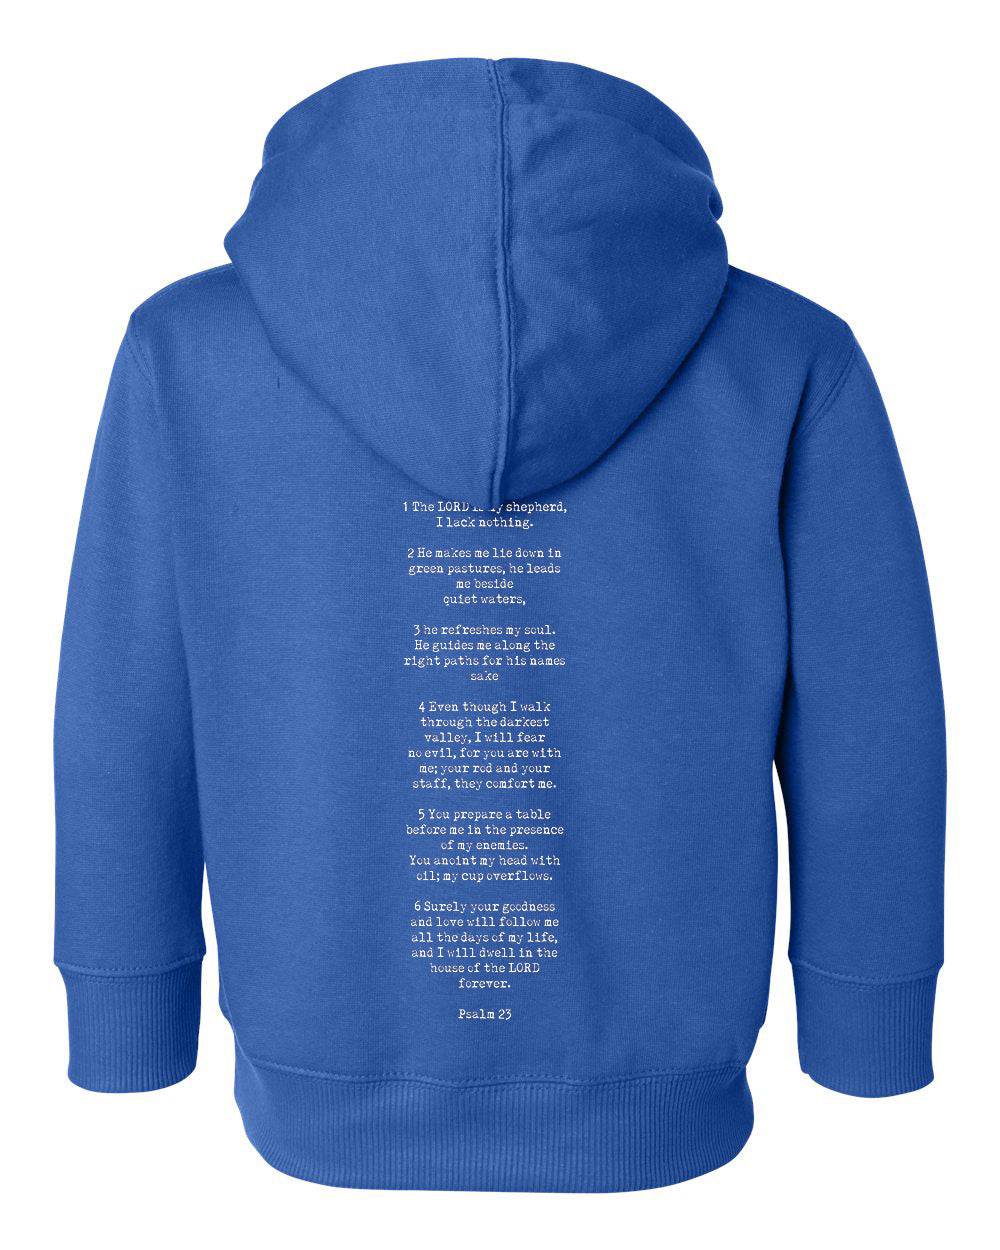 Psalm 23 Toddler Hoodie